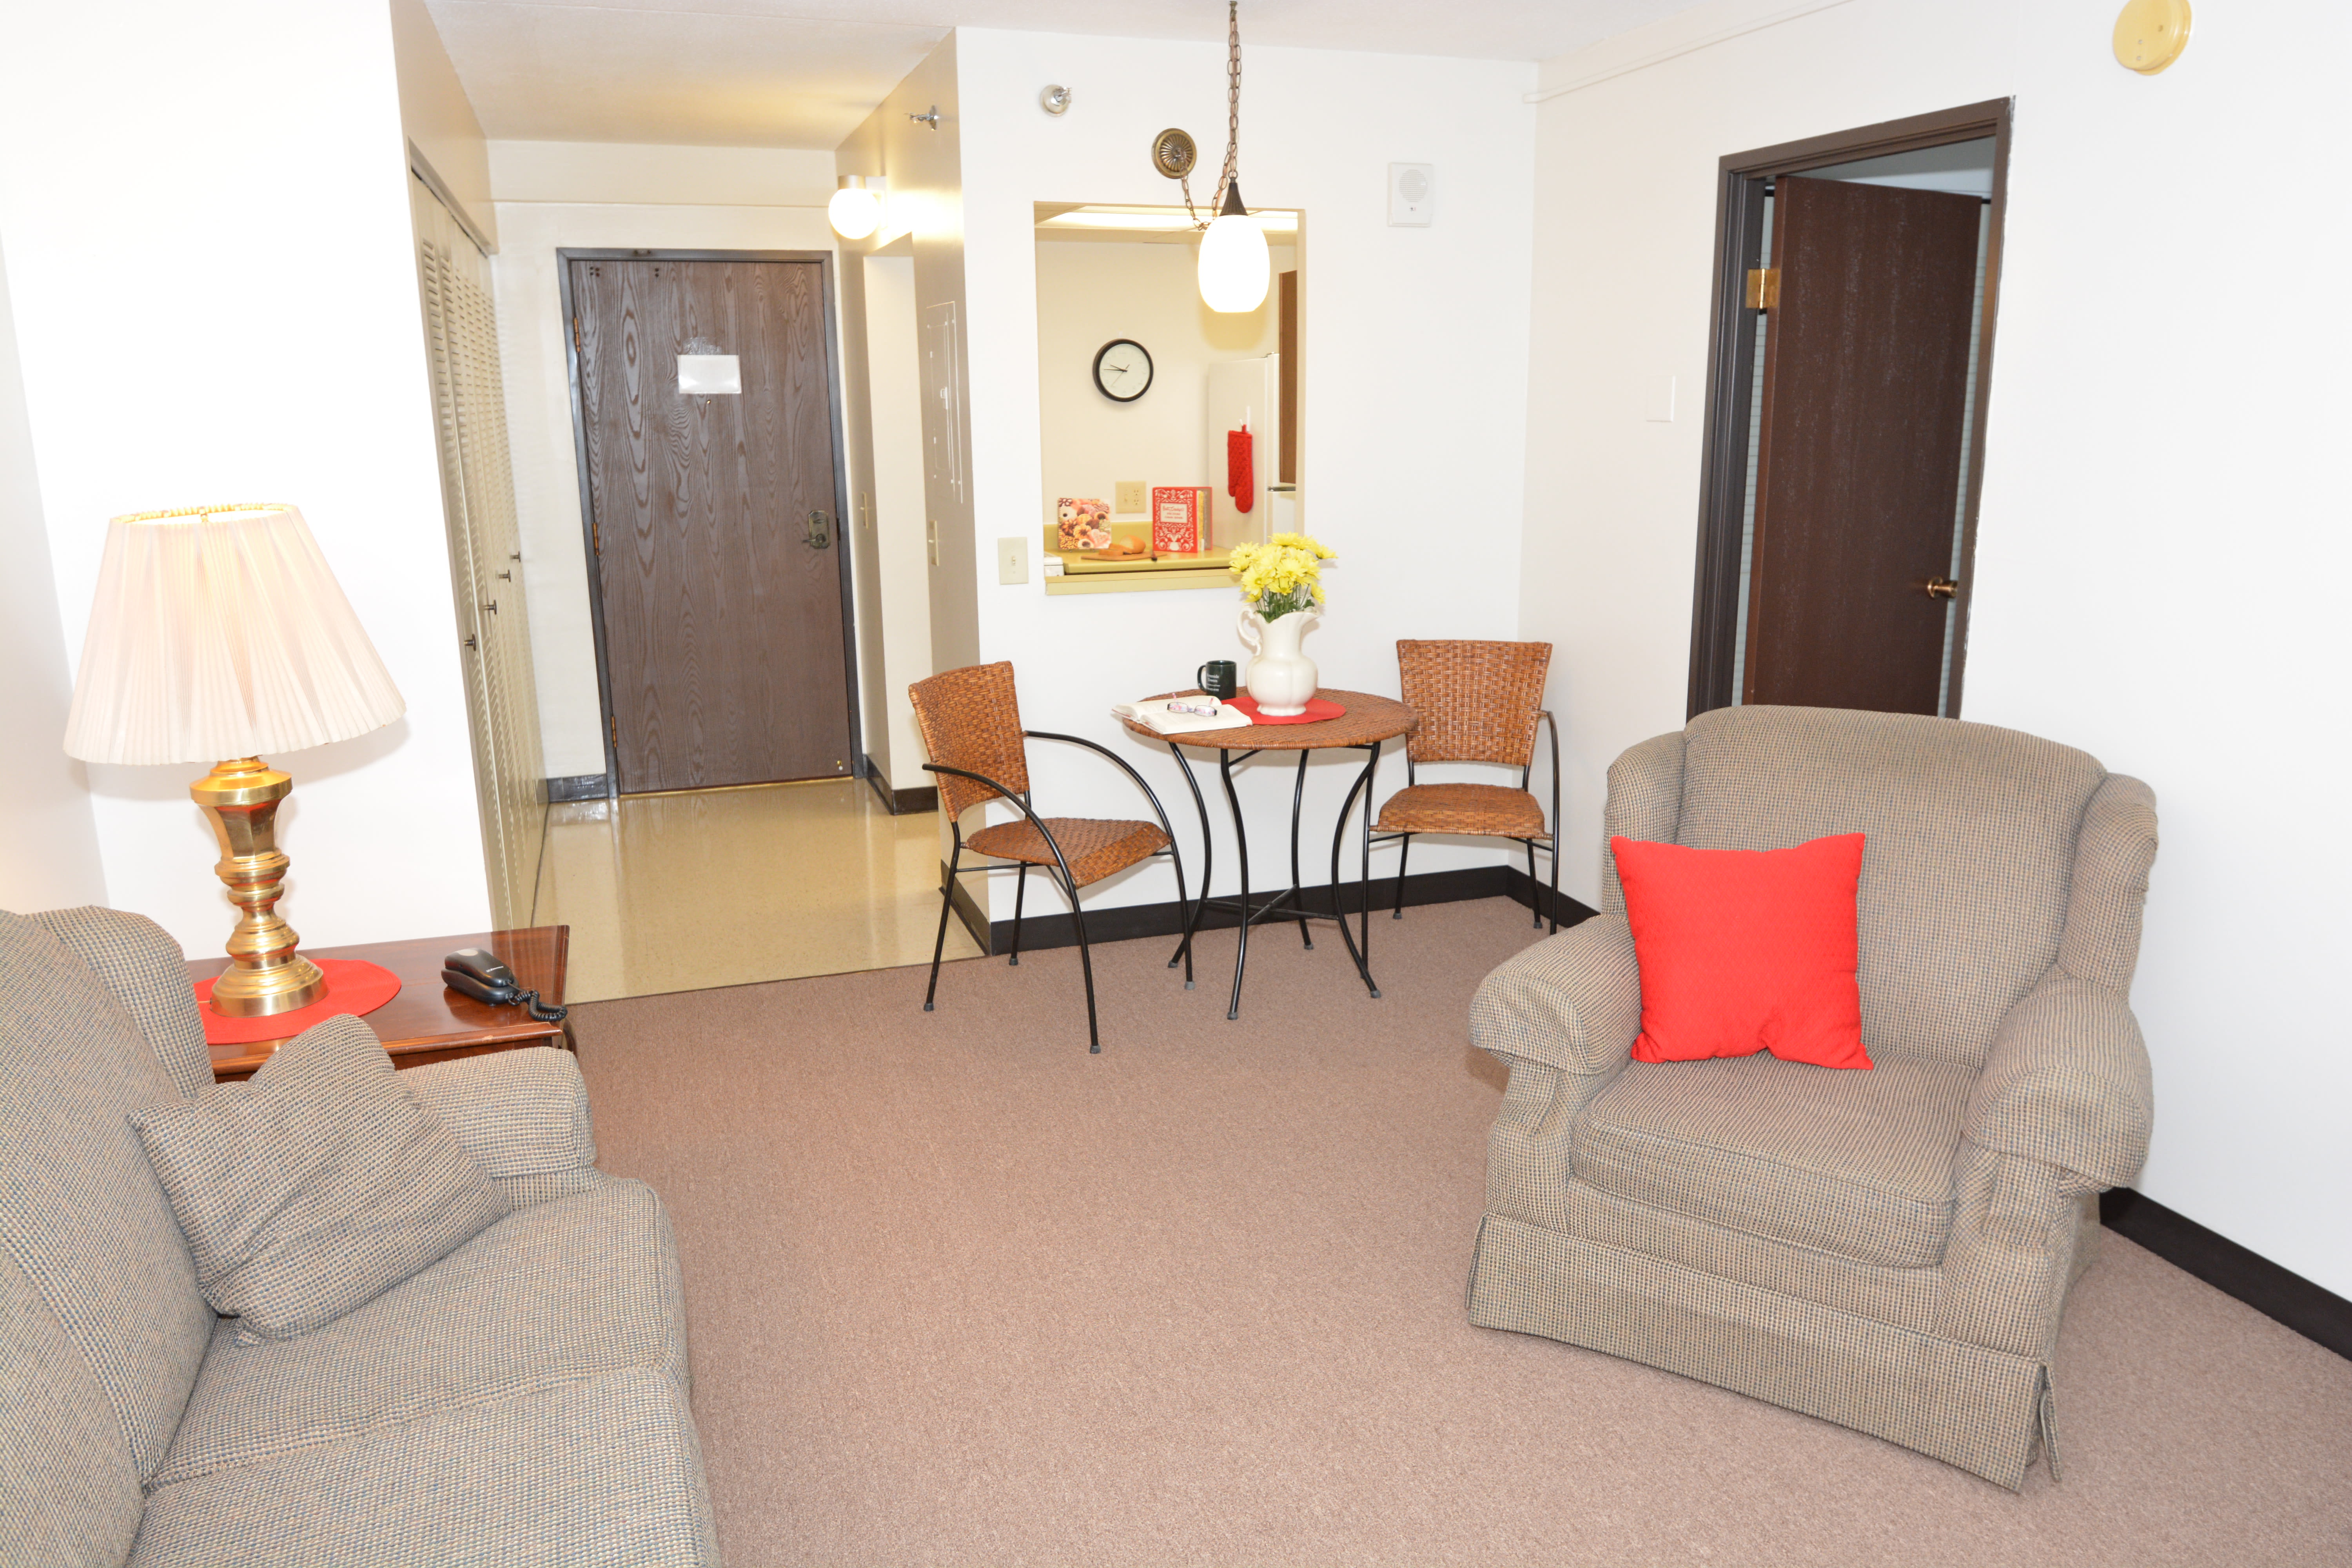 Living space with wall-to-wall carpeting at Riverside Towers in Coshocton, Ohio